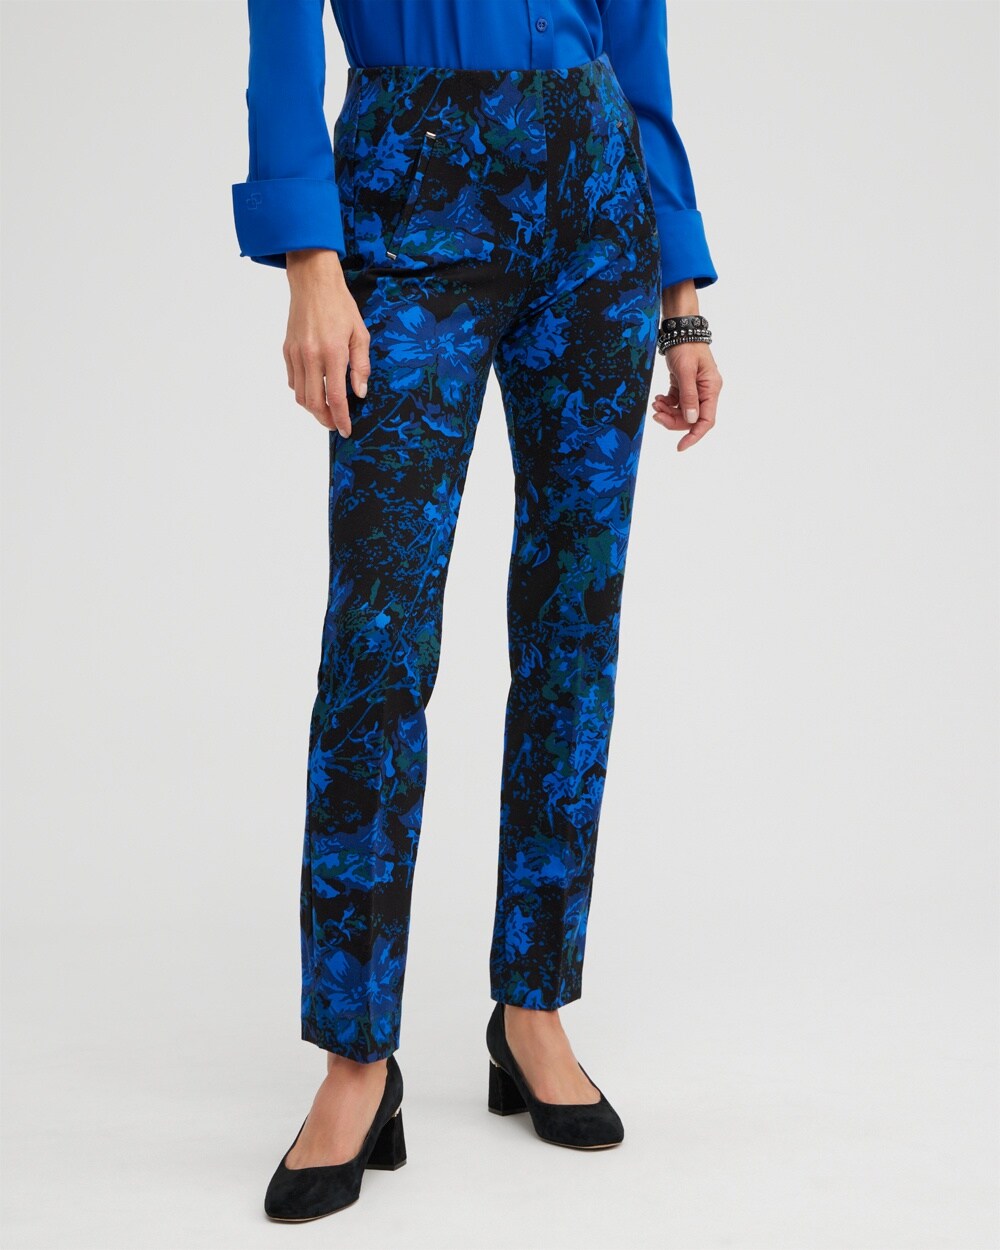 Juliet Floral Metallic Trim Ankle Pants video preview image, click to start video